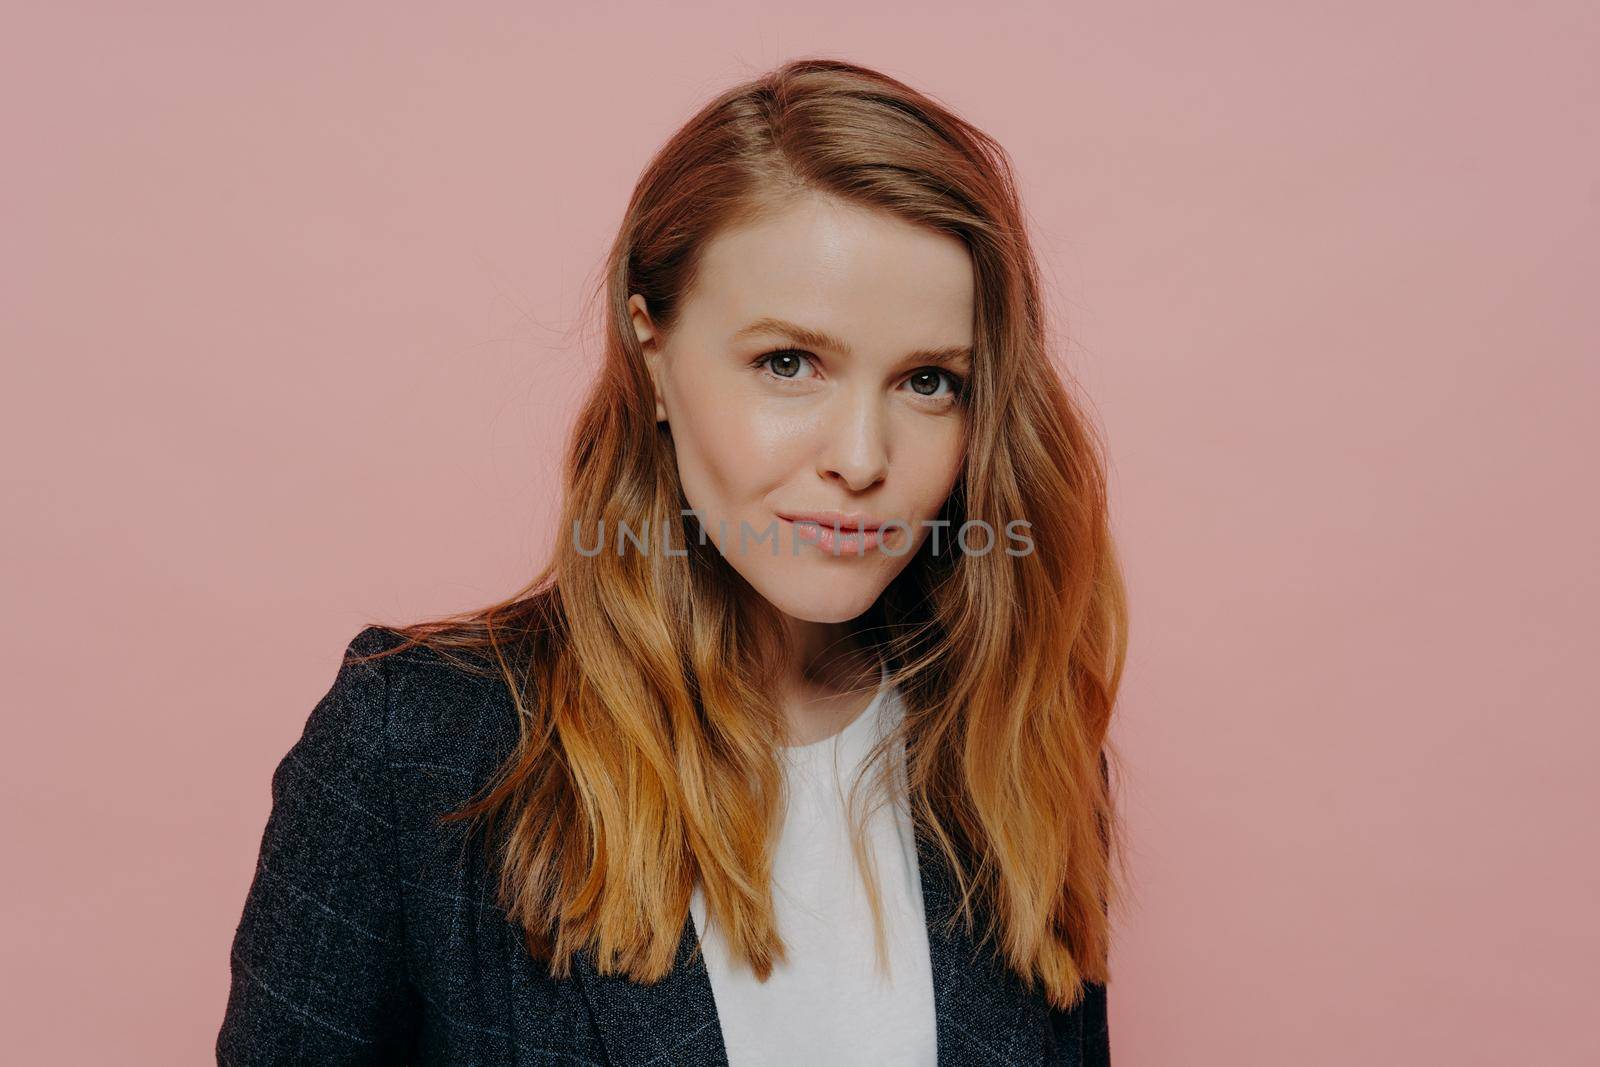 Portrait of beautiful young woman with ginger hair looking at camera confidently, wearing dark formal jacket and white top posing isolated against pink studio wall. Human emotions concept